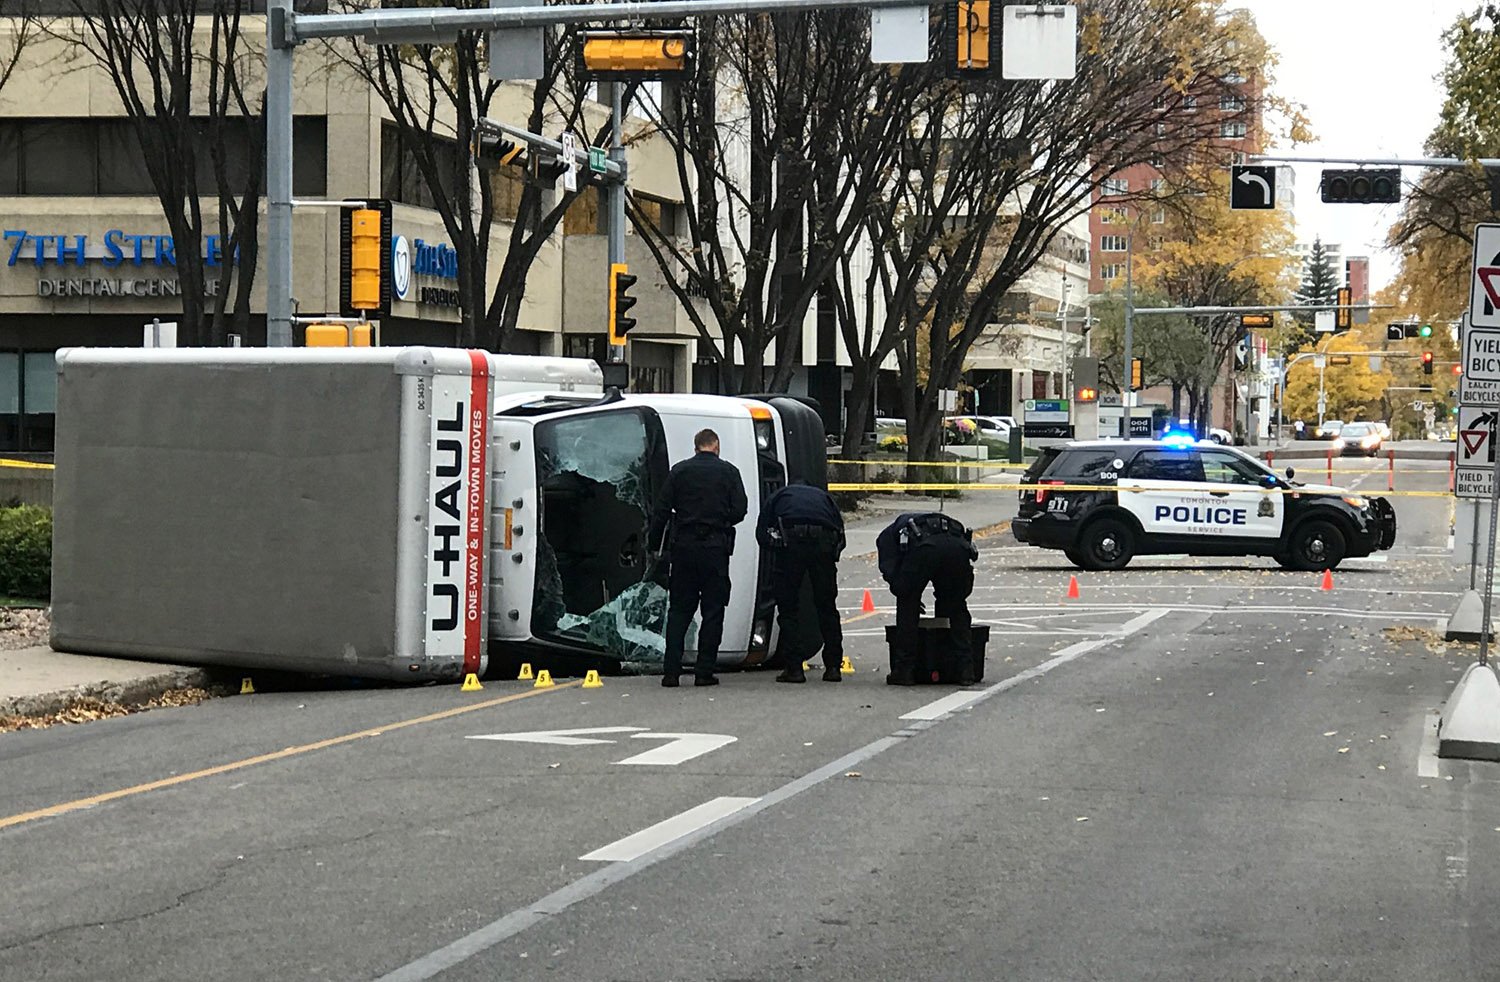 Edmonton Police investigate at the scene where a man hit pedestrians then flipped the U-Haul truck he was driving, pictured at the intersection at 107 Street and 100th Avenue in front of the Matrix Hotel in Edmonton, Alberta, Canada October 1, 2017. REUTERS/Candace Elliott